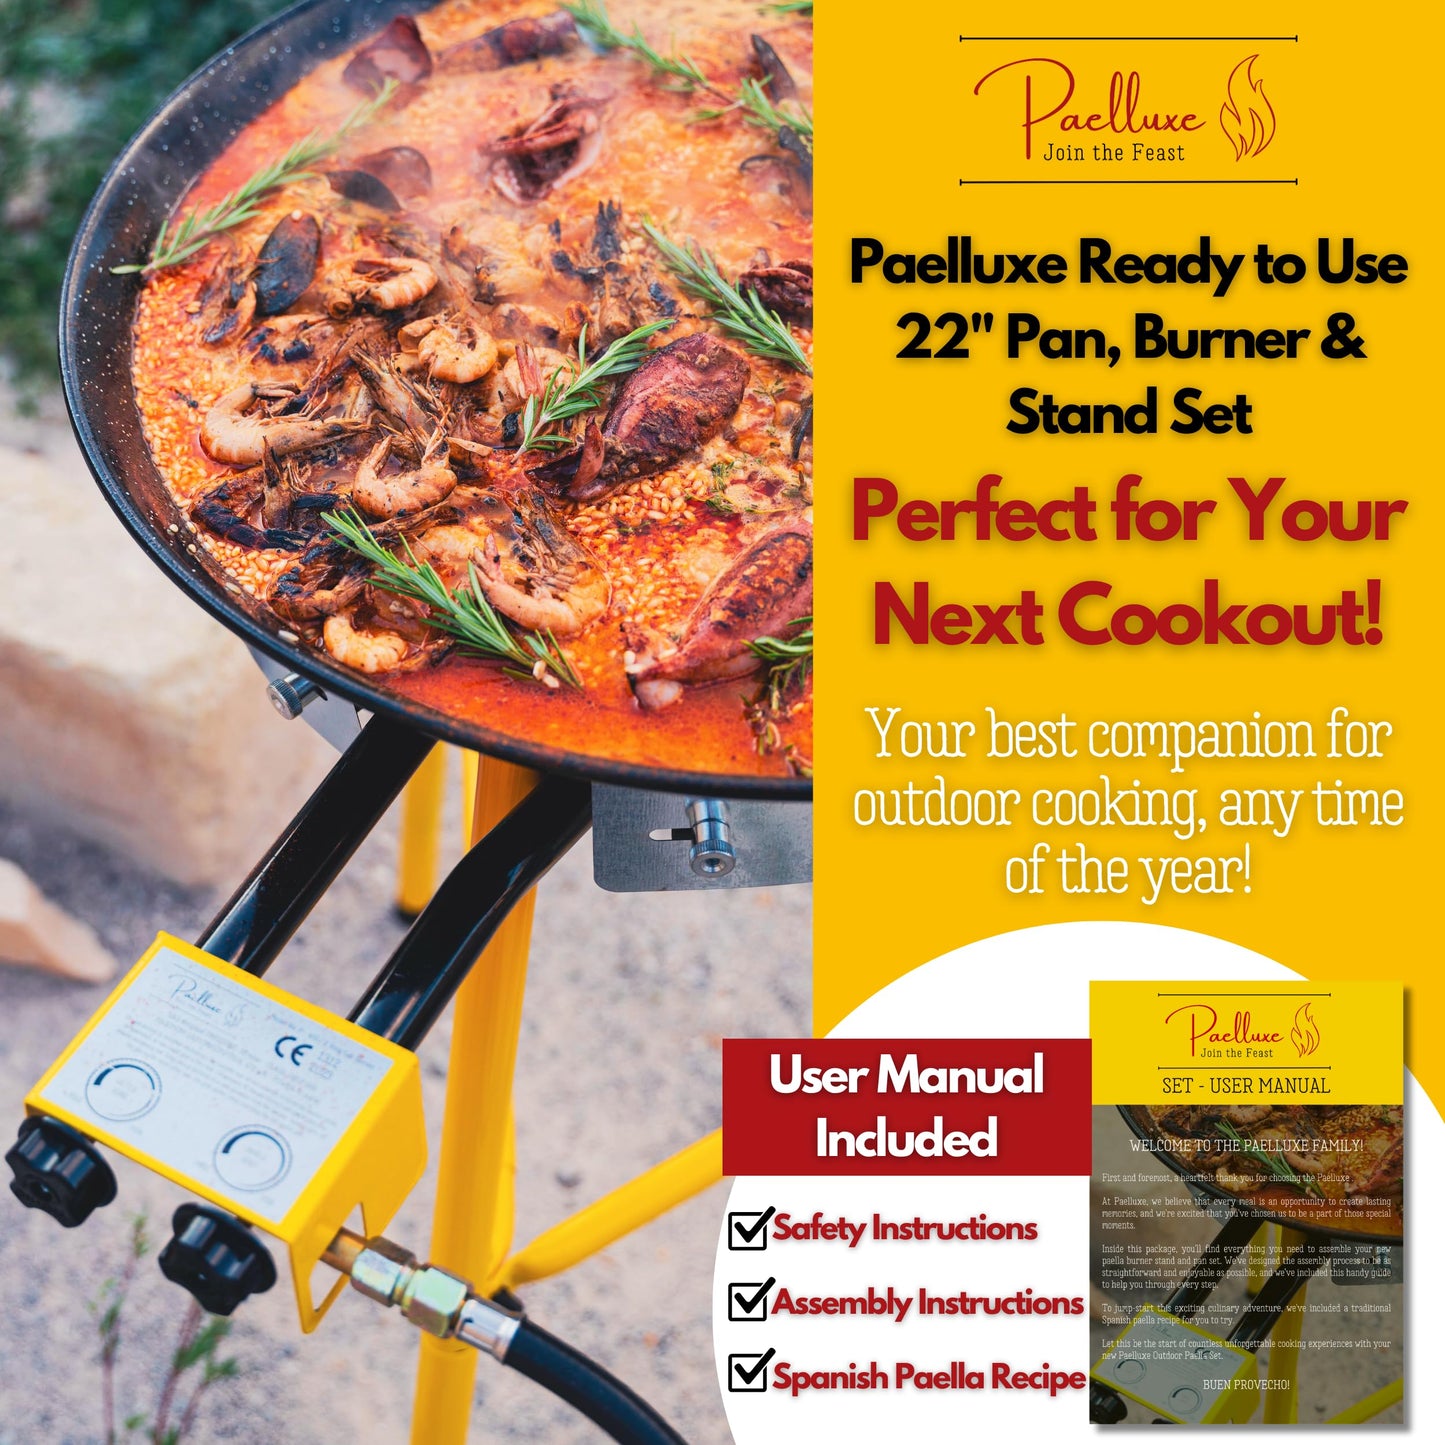 Paelluxe Complete Paella Pan Burner & Stand Set - Double Propane Burners, 22 Inch Pan Set - Outdoor Gas Stove - Portable Cooking - Wok Burner, Table Top Burners - Camping Grill, Backyard & Patio Stove